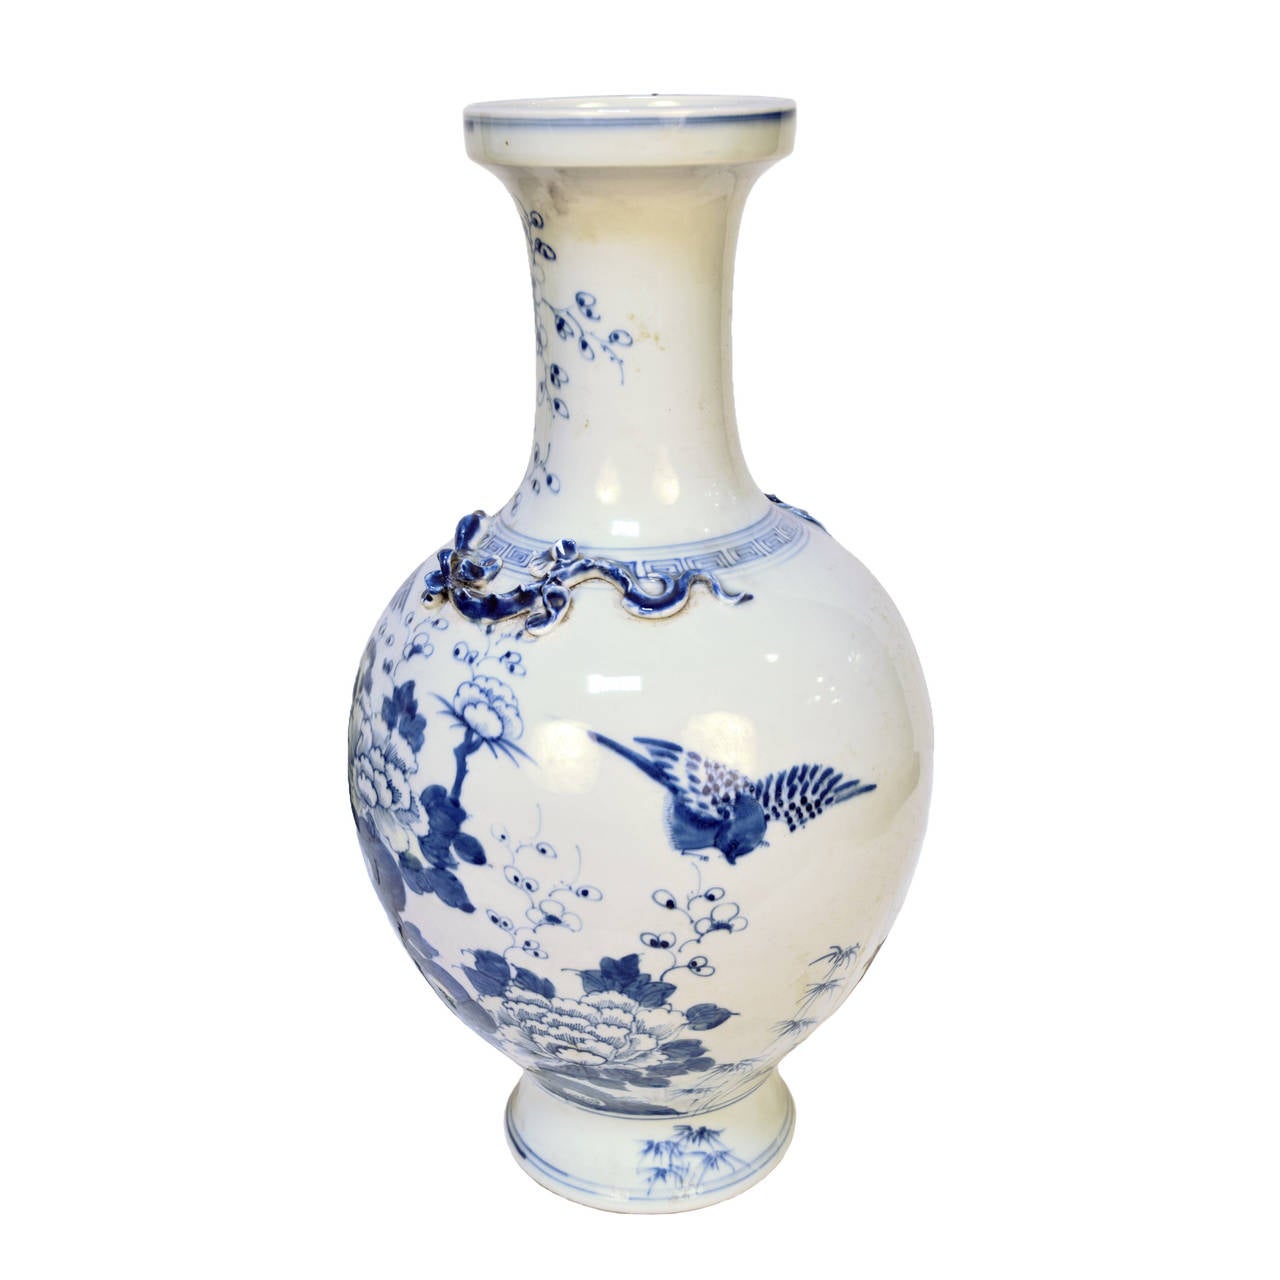 A blue and white porcelain vase from Beijing, China was a songbird motif and raised reptile along the neck.